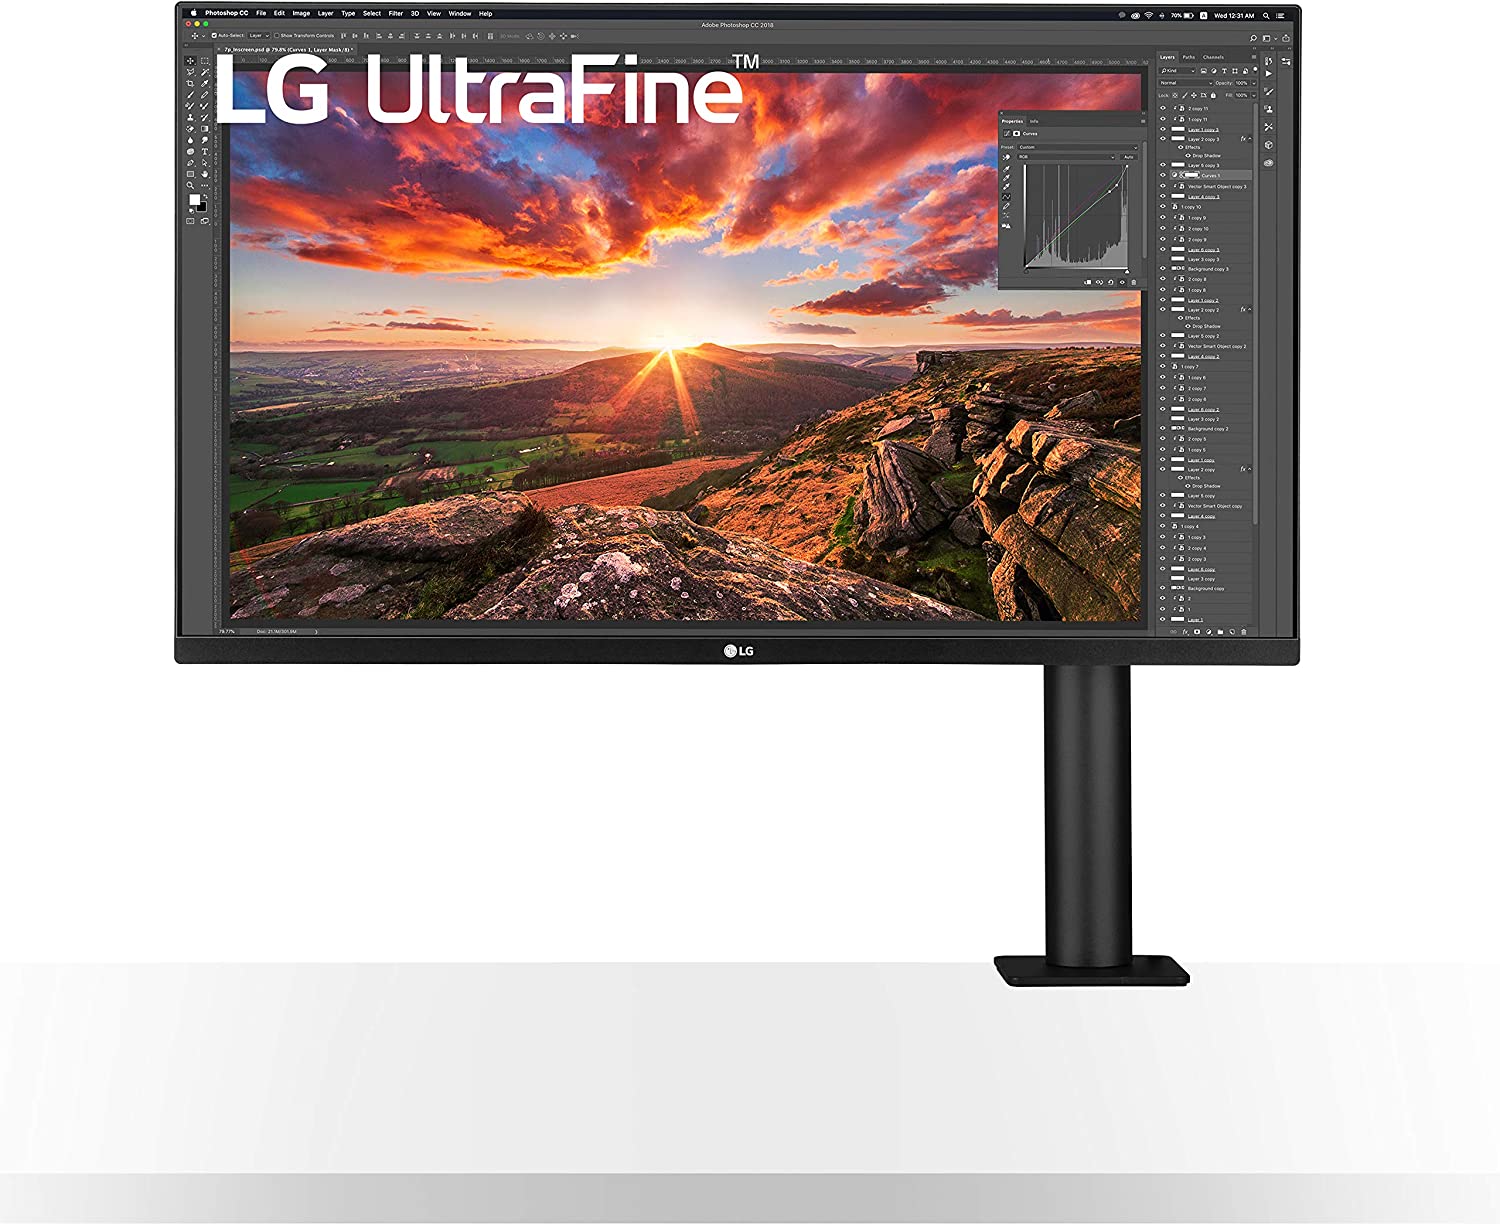 Review on the LG 32UN880 UltraFine Display Ergo